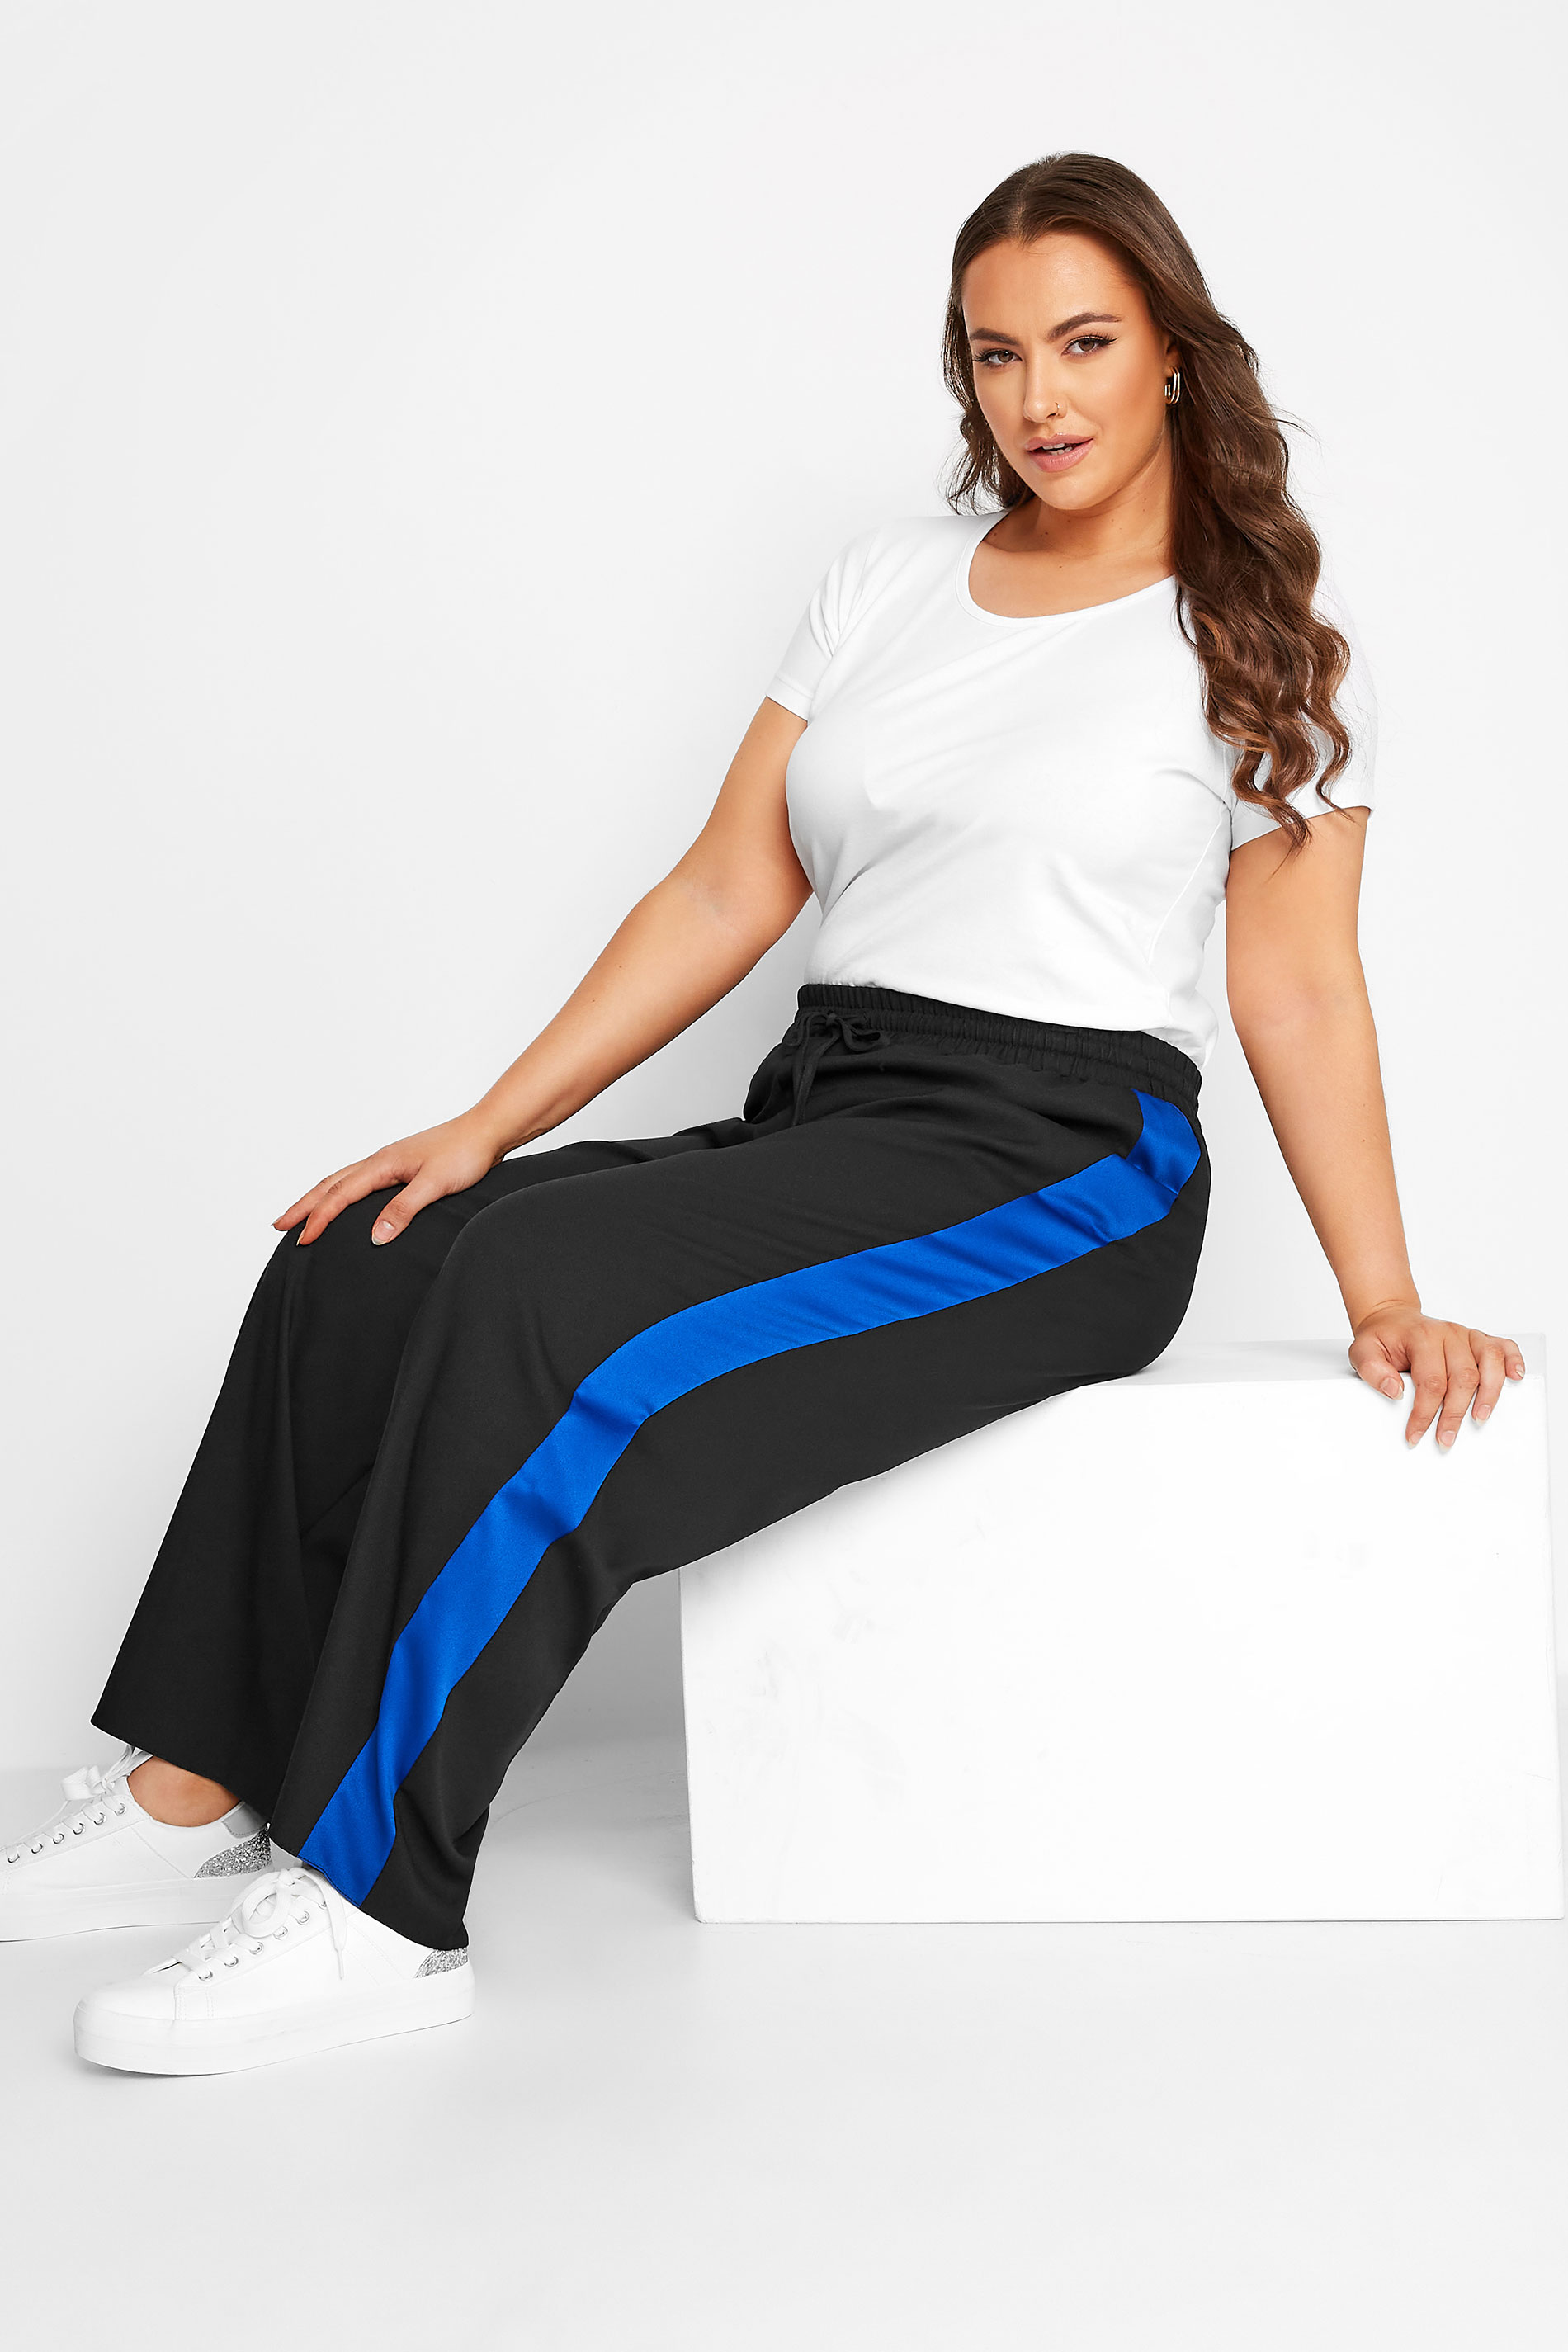 CLUB OF COMFORT PLUS SIZES STRETCH TROUSERS FOR BIG AND TALL MEN